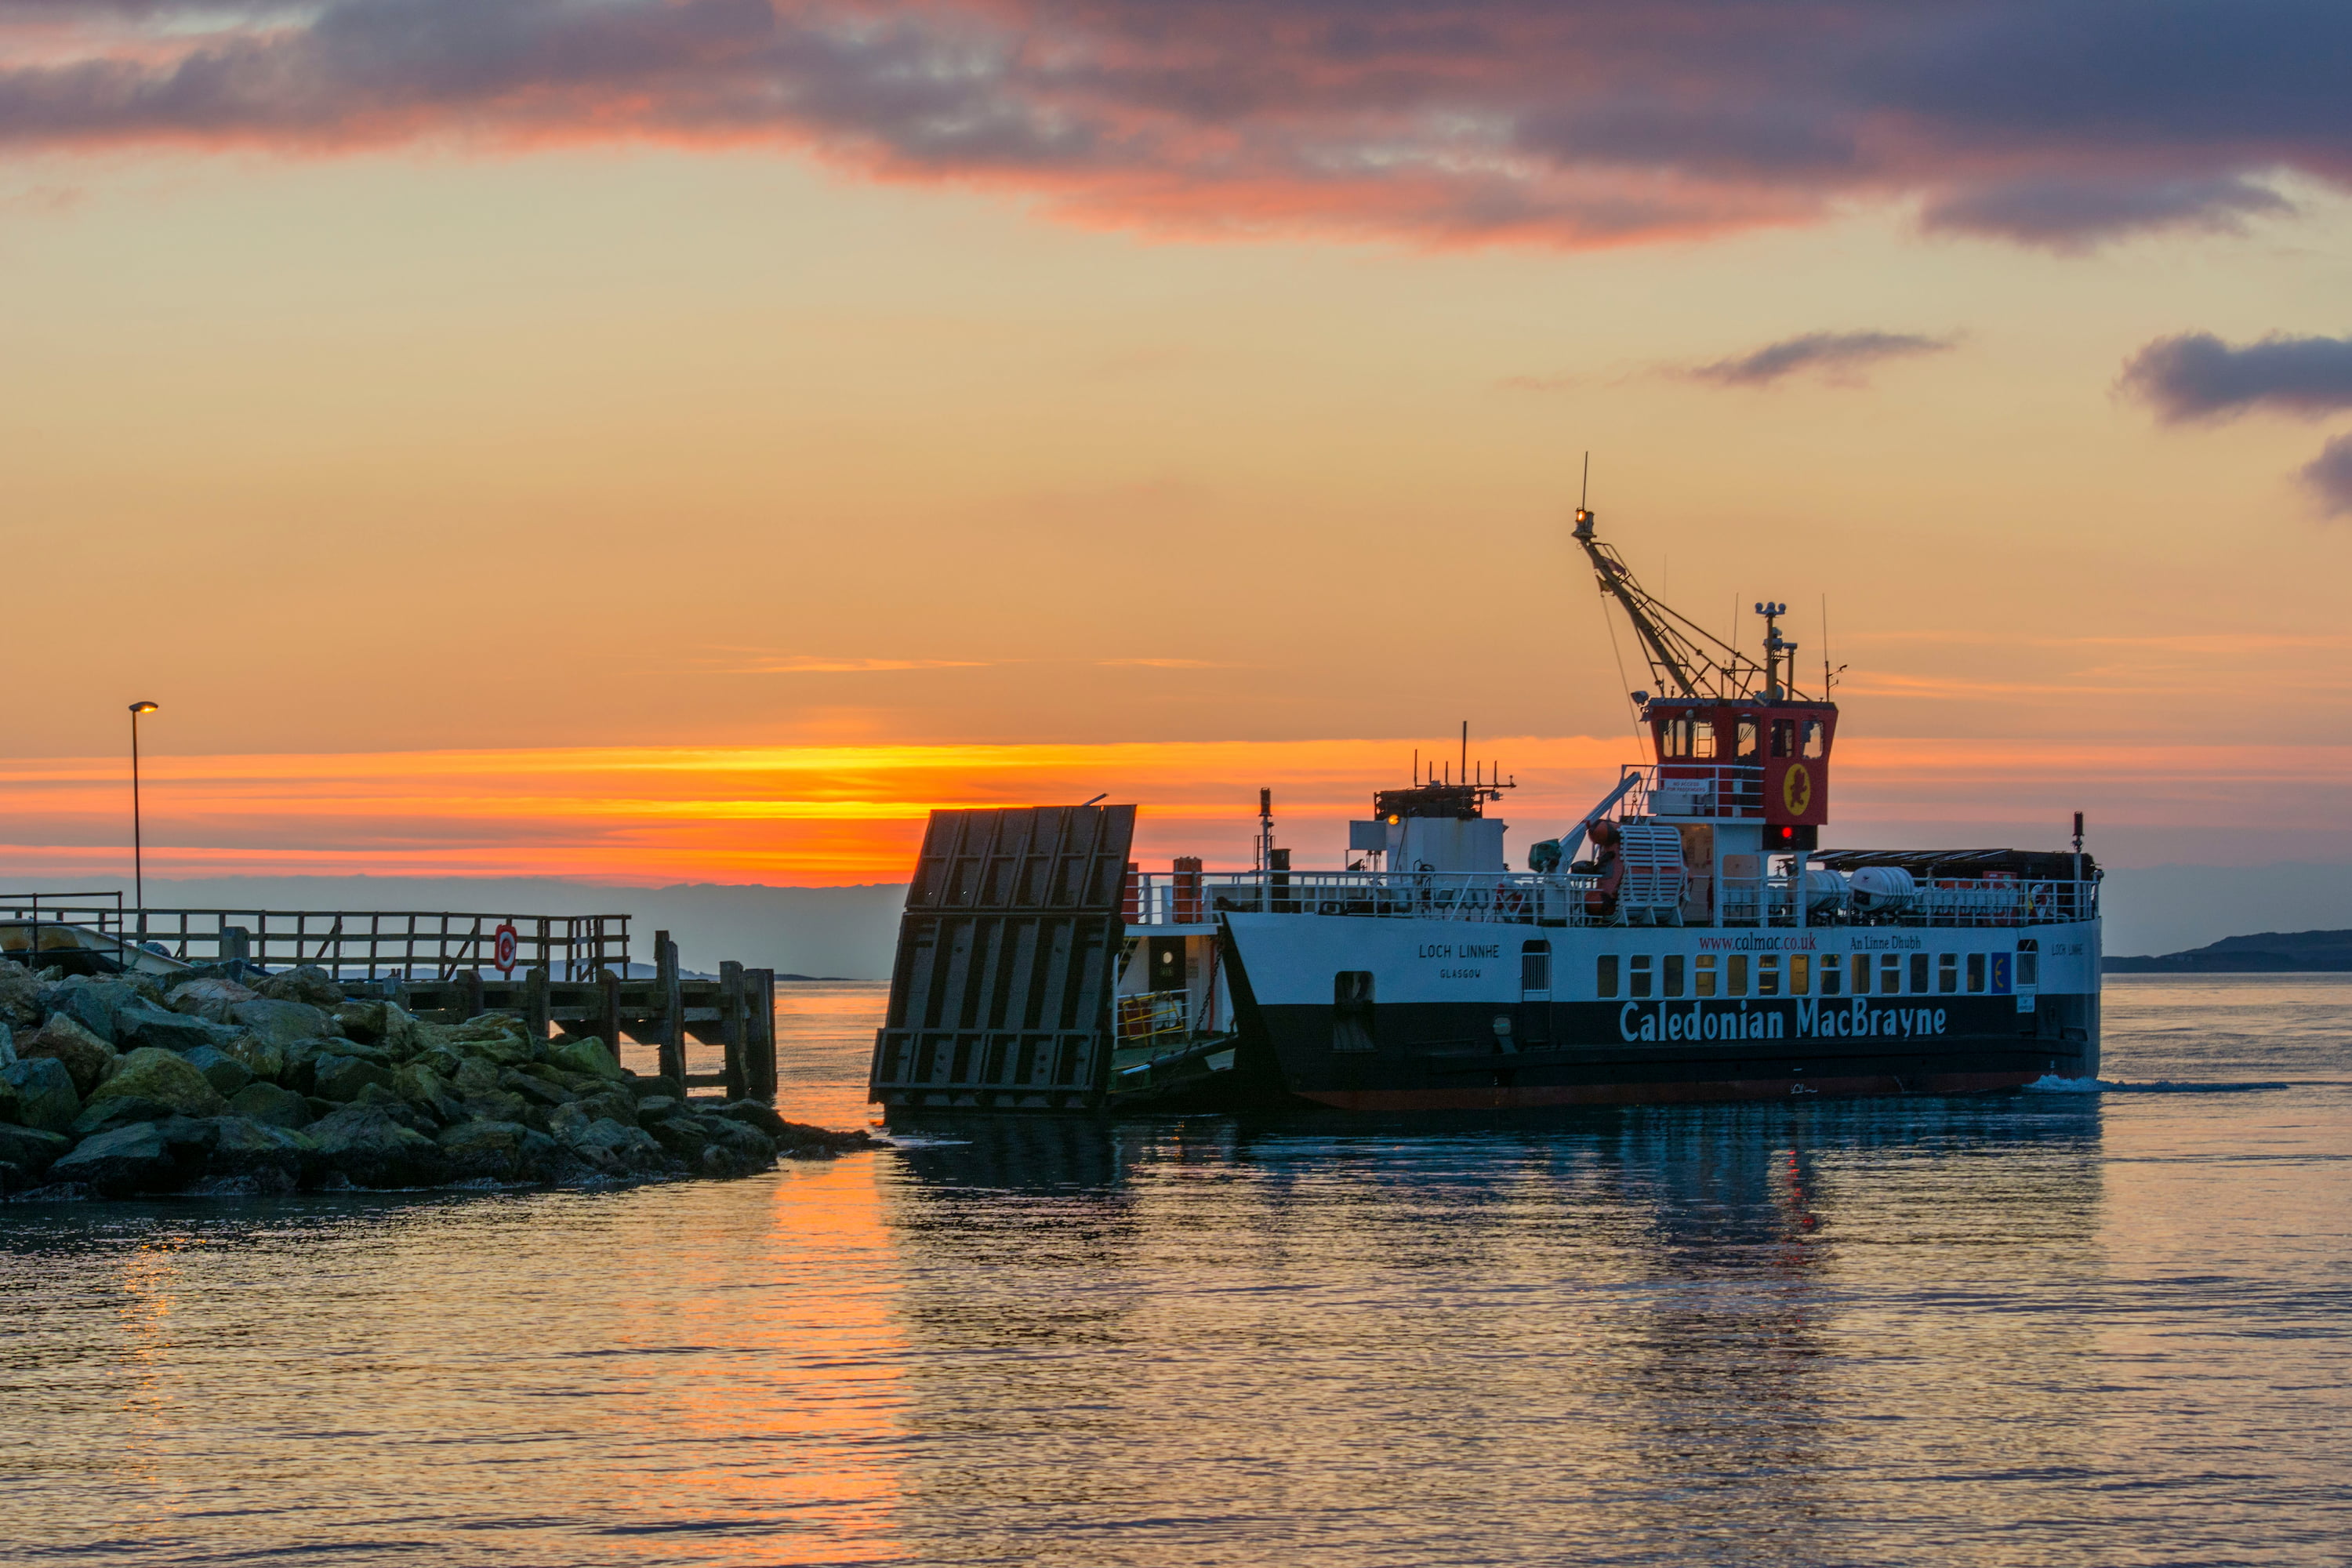 Isle of Gigha ferry at sunset